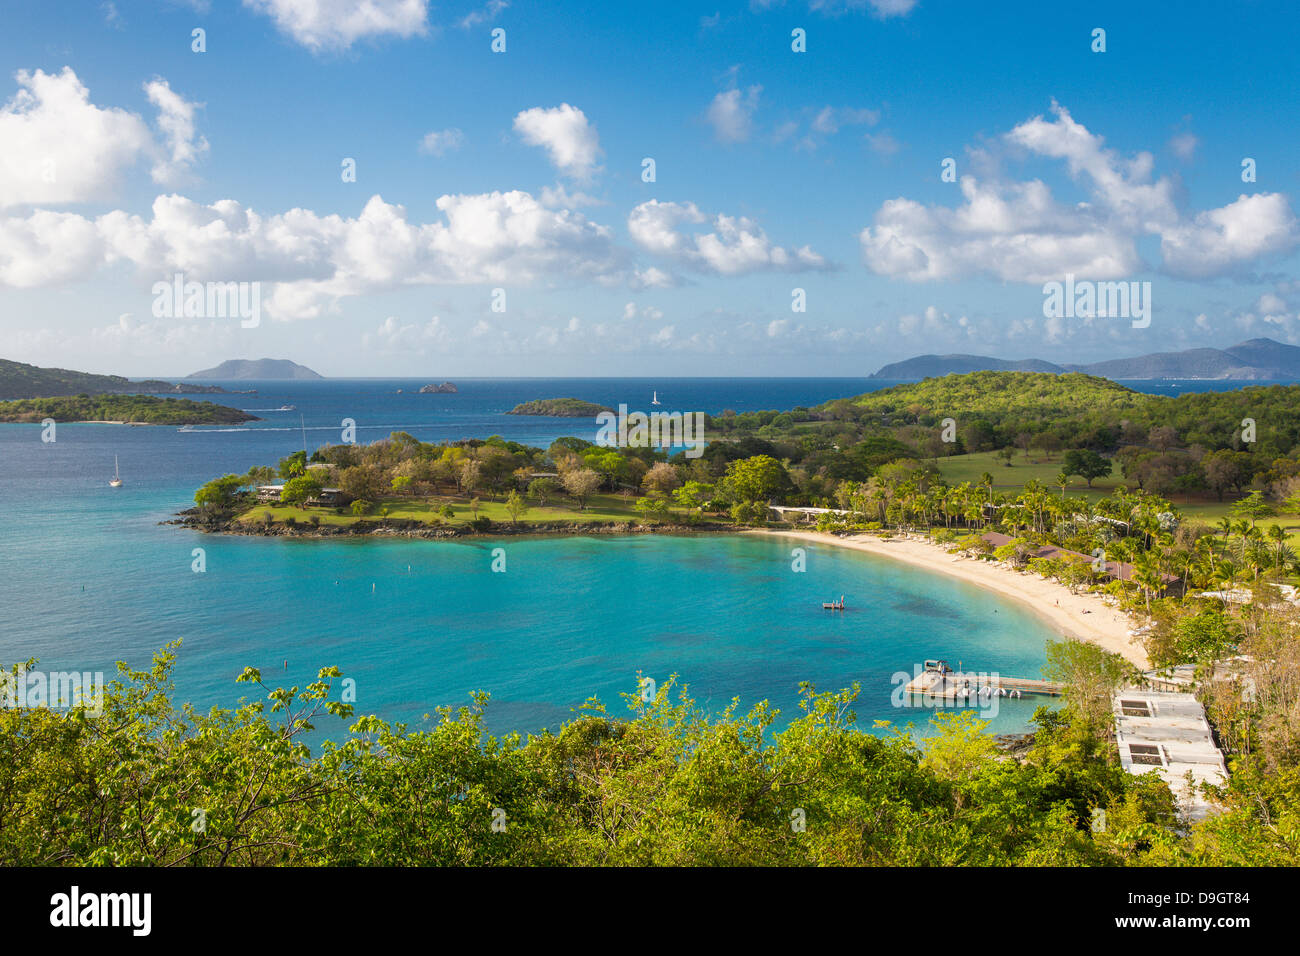 Caneel Bay on the Caribbean Island of St John in the US Virgin Islands Stock Photo